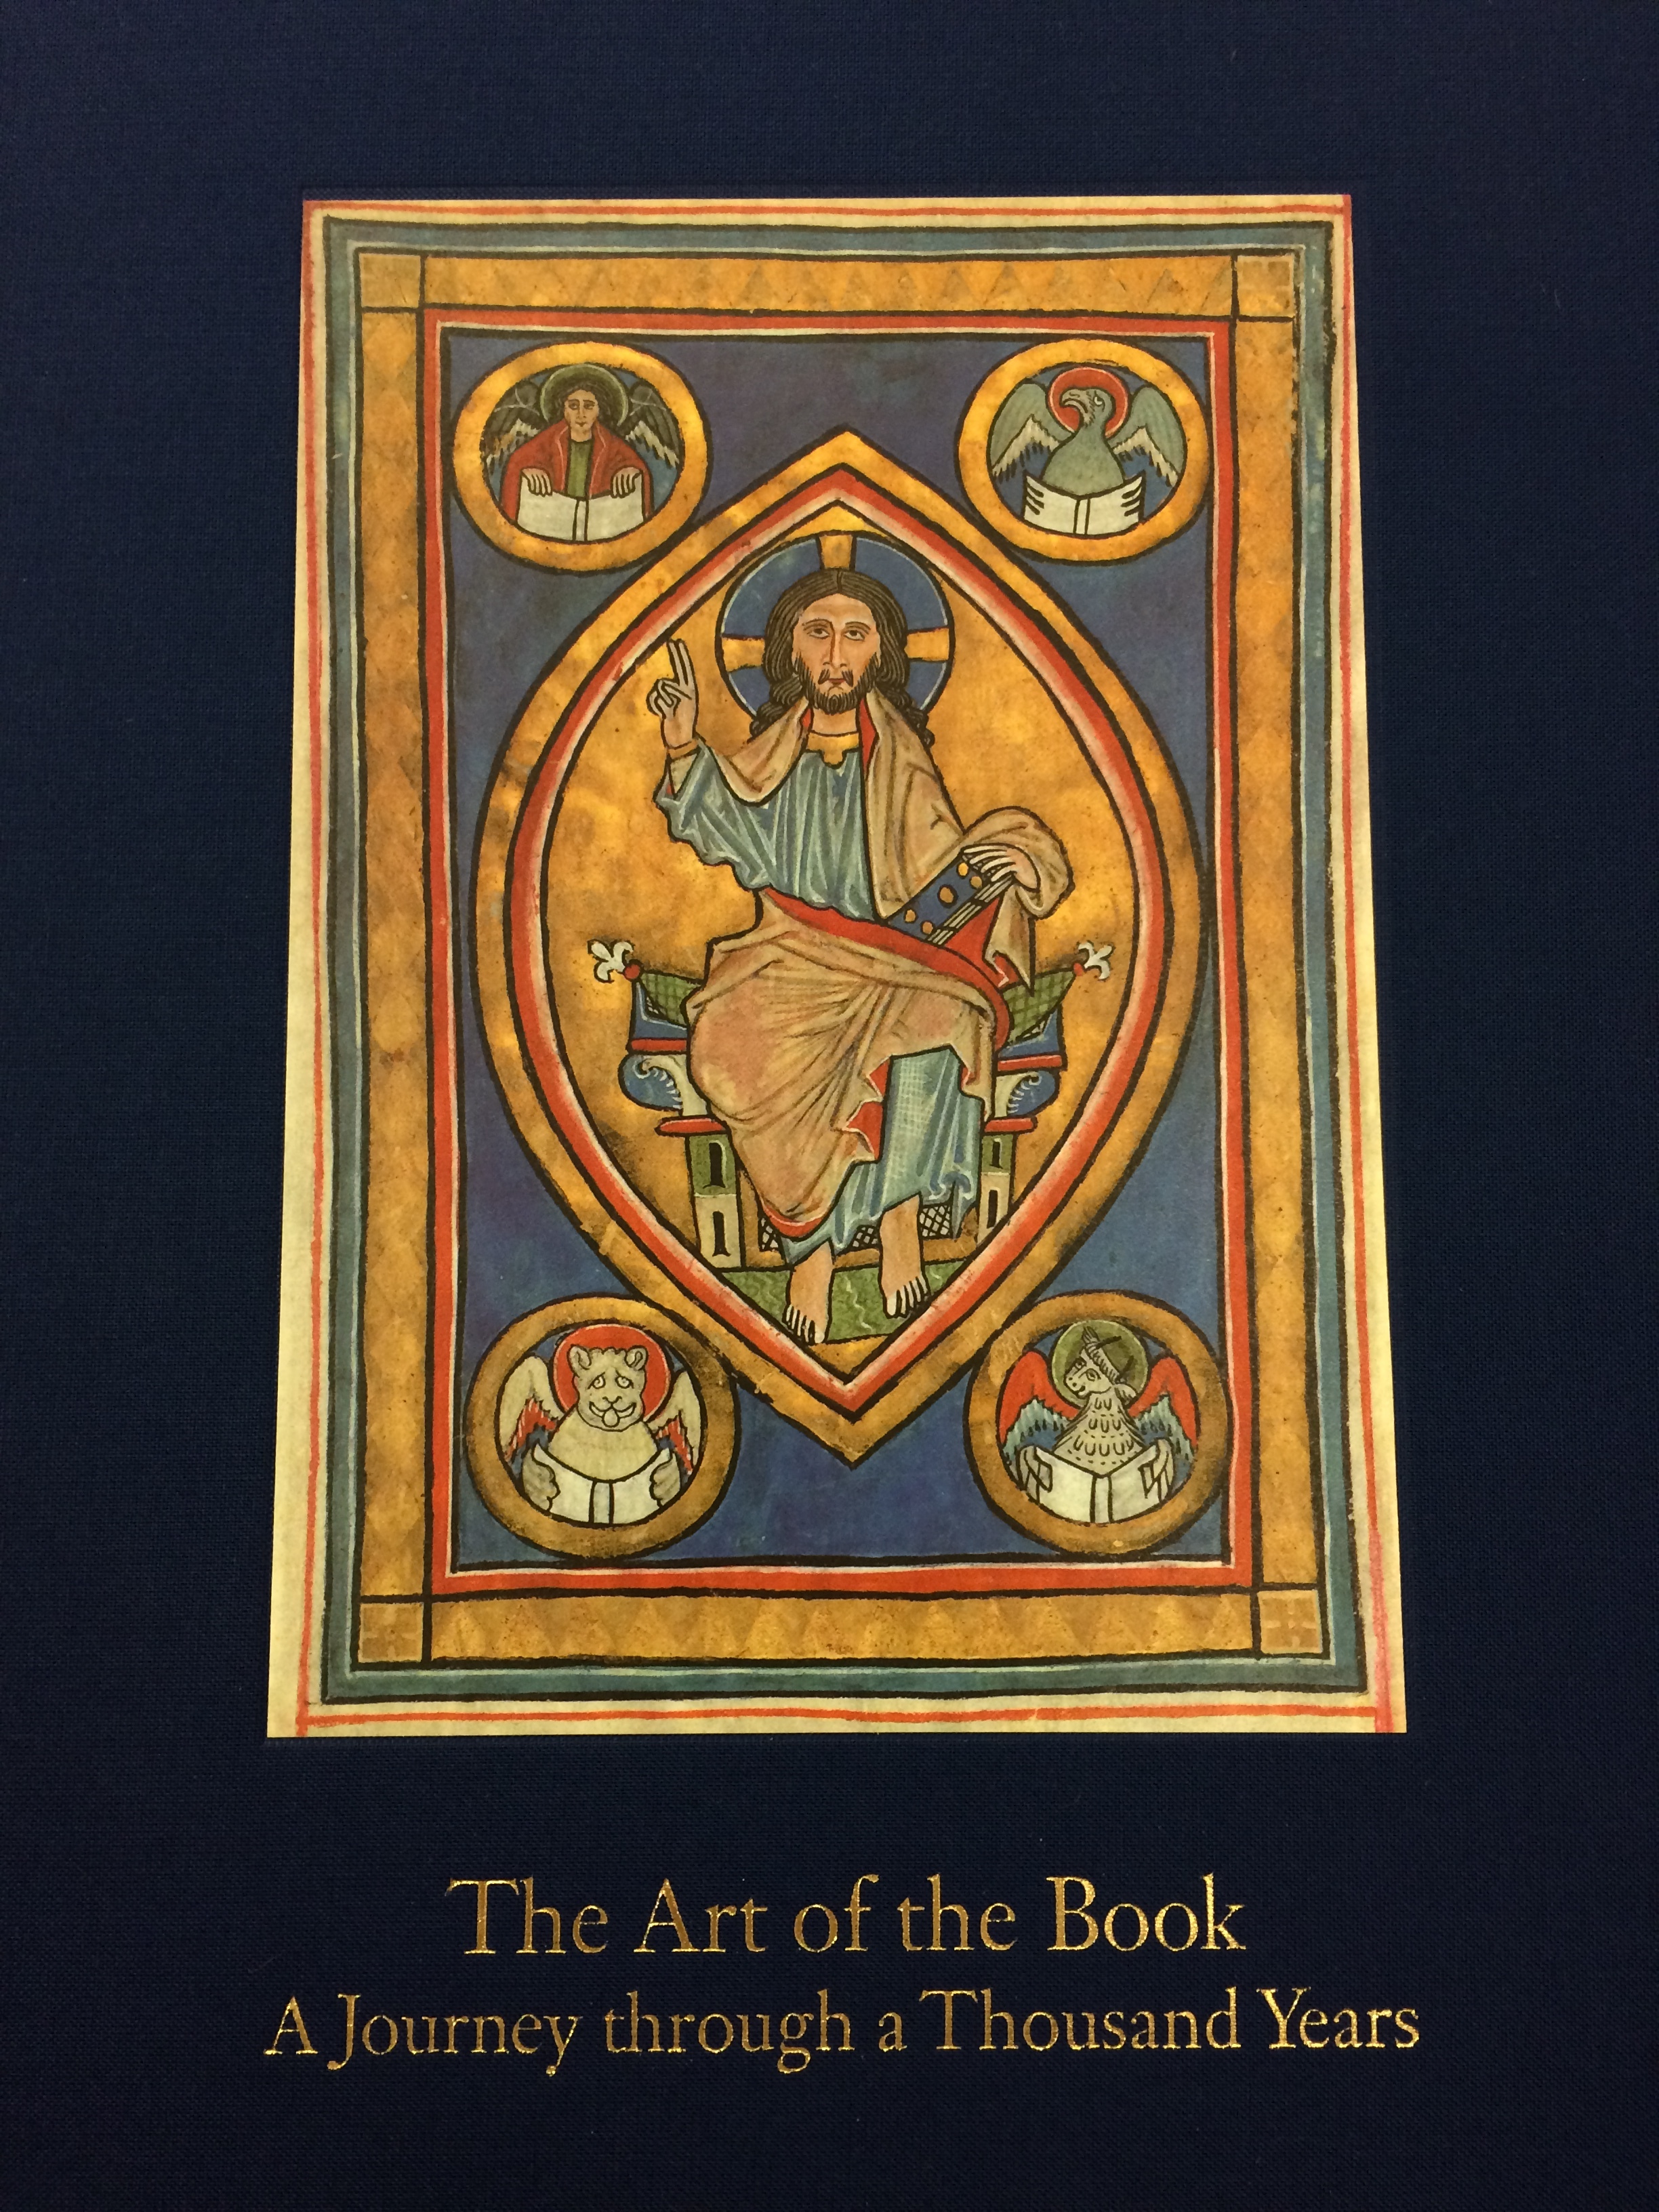 The Art of the Book- A Journey through a Thousand Years